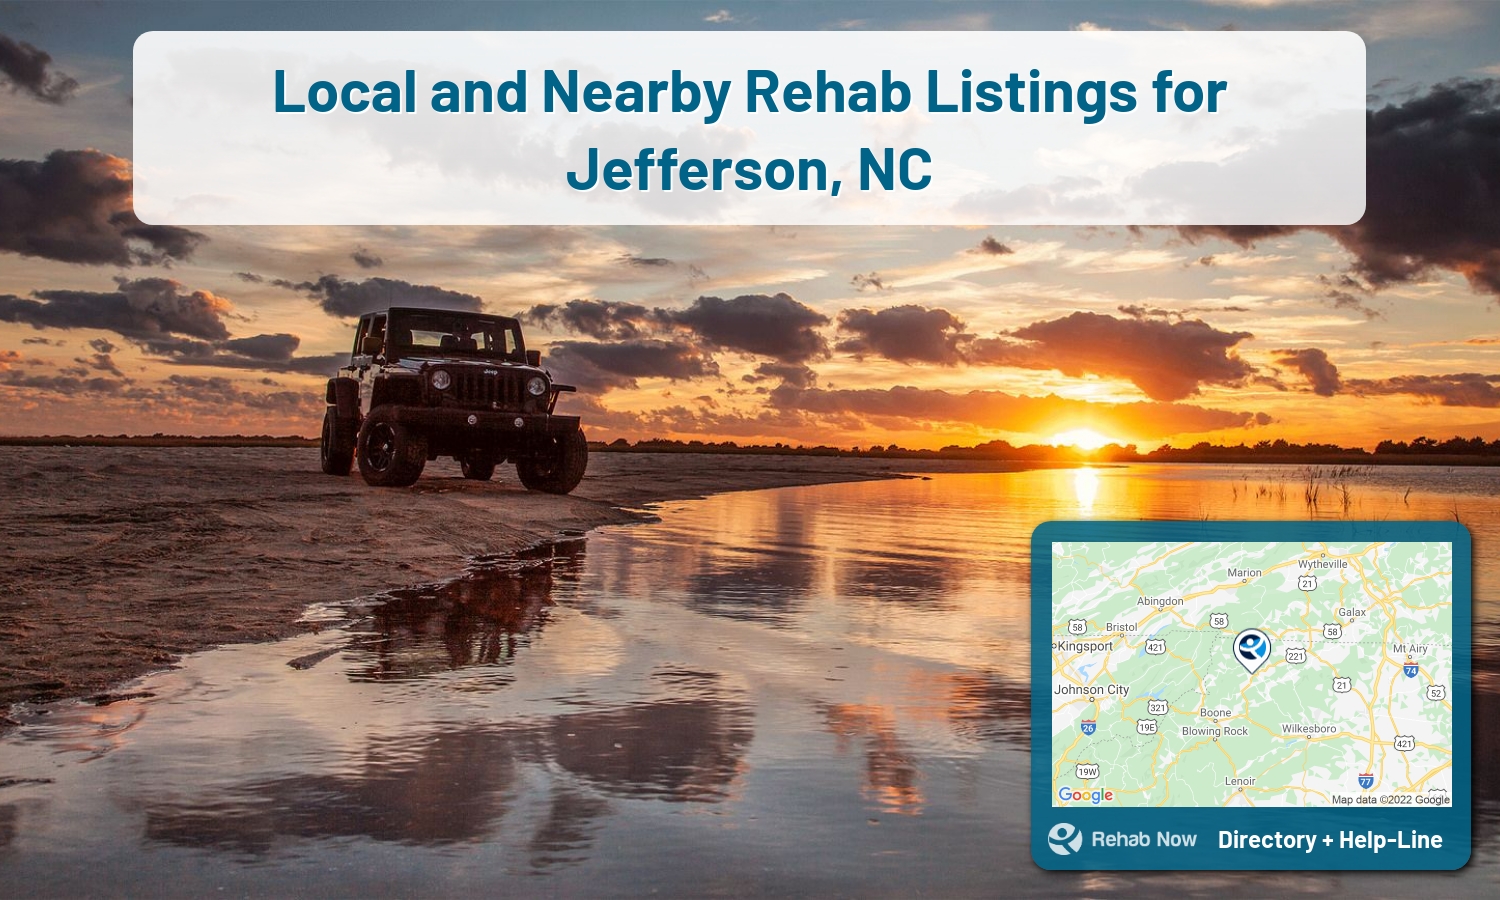 Jefferson, NC Treatment Centers. Find drug rehab in Jefferson, North Carolina, or detox and treatment programs. Get the right help now!